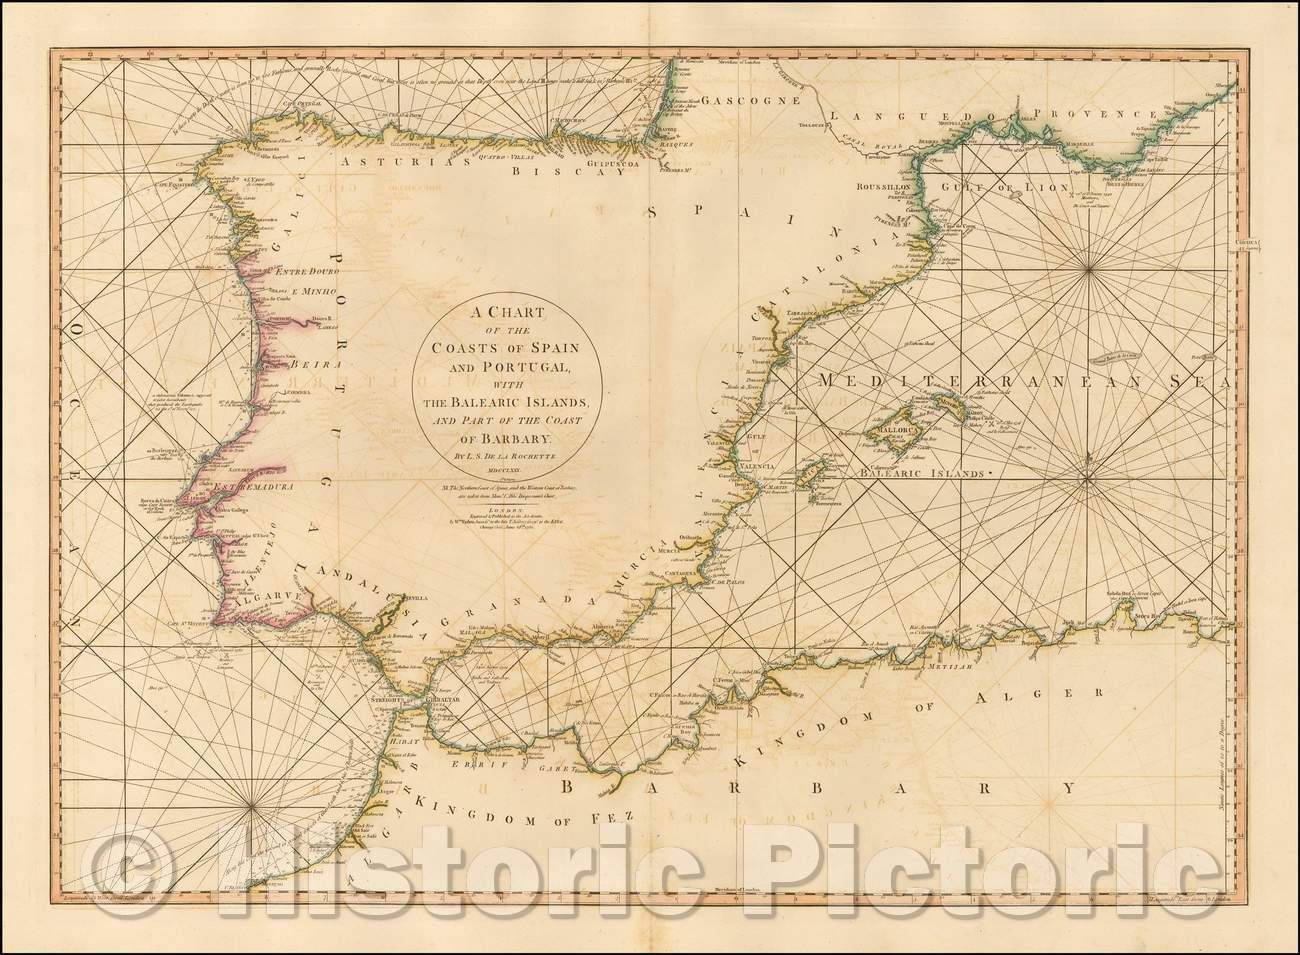 Historic Map - A Chart of the Coasts of Spain and Portugal, with the Balearic Islands, and Part of the Coast of Barbary. MDCCLXXX, 1780, William Faden v2